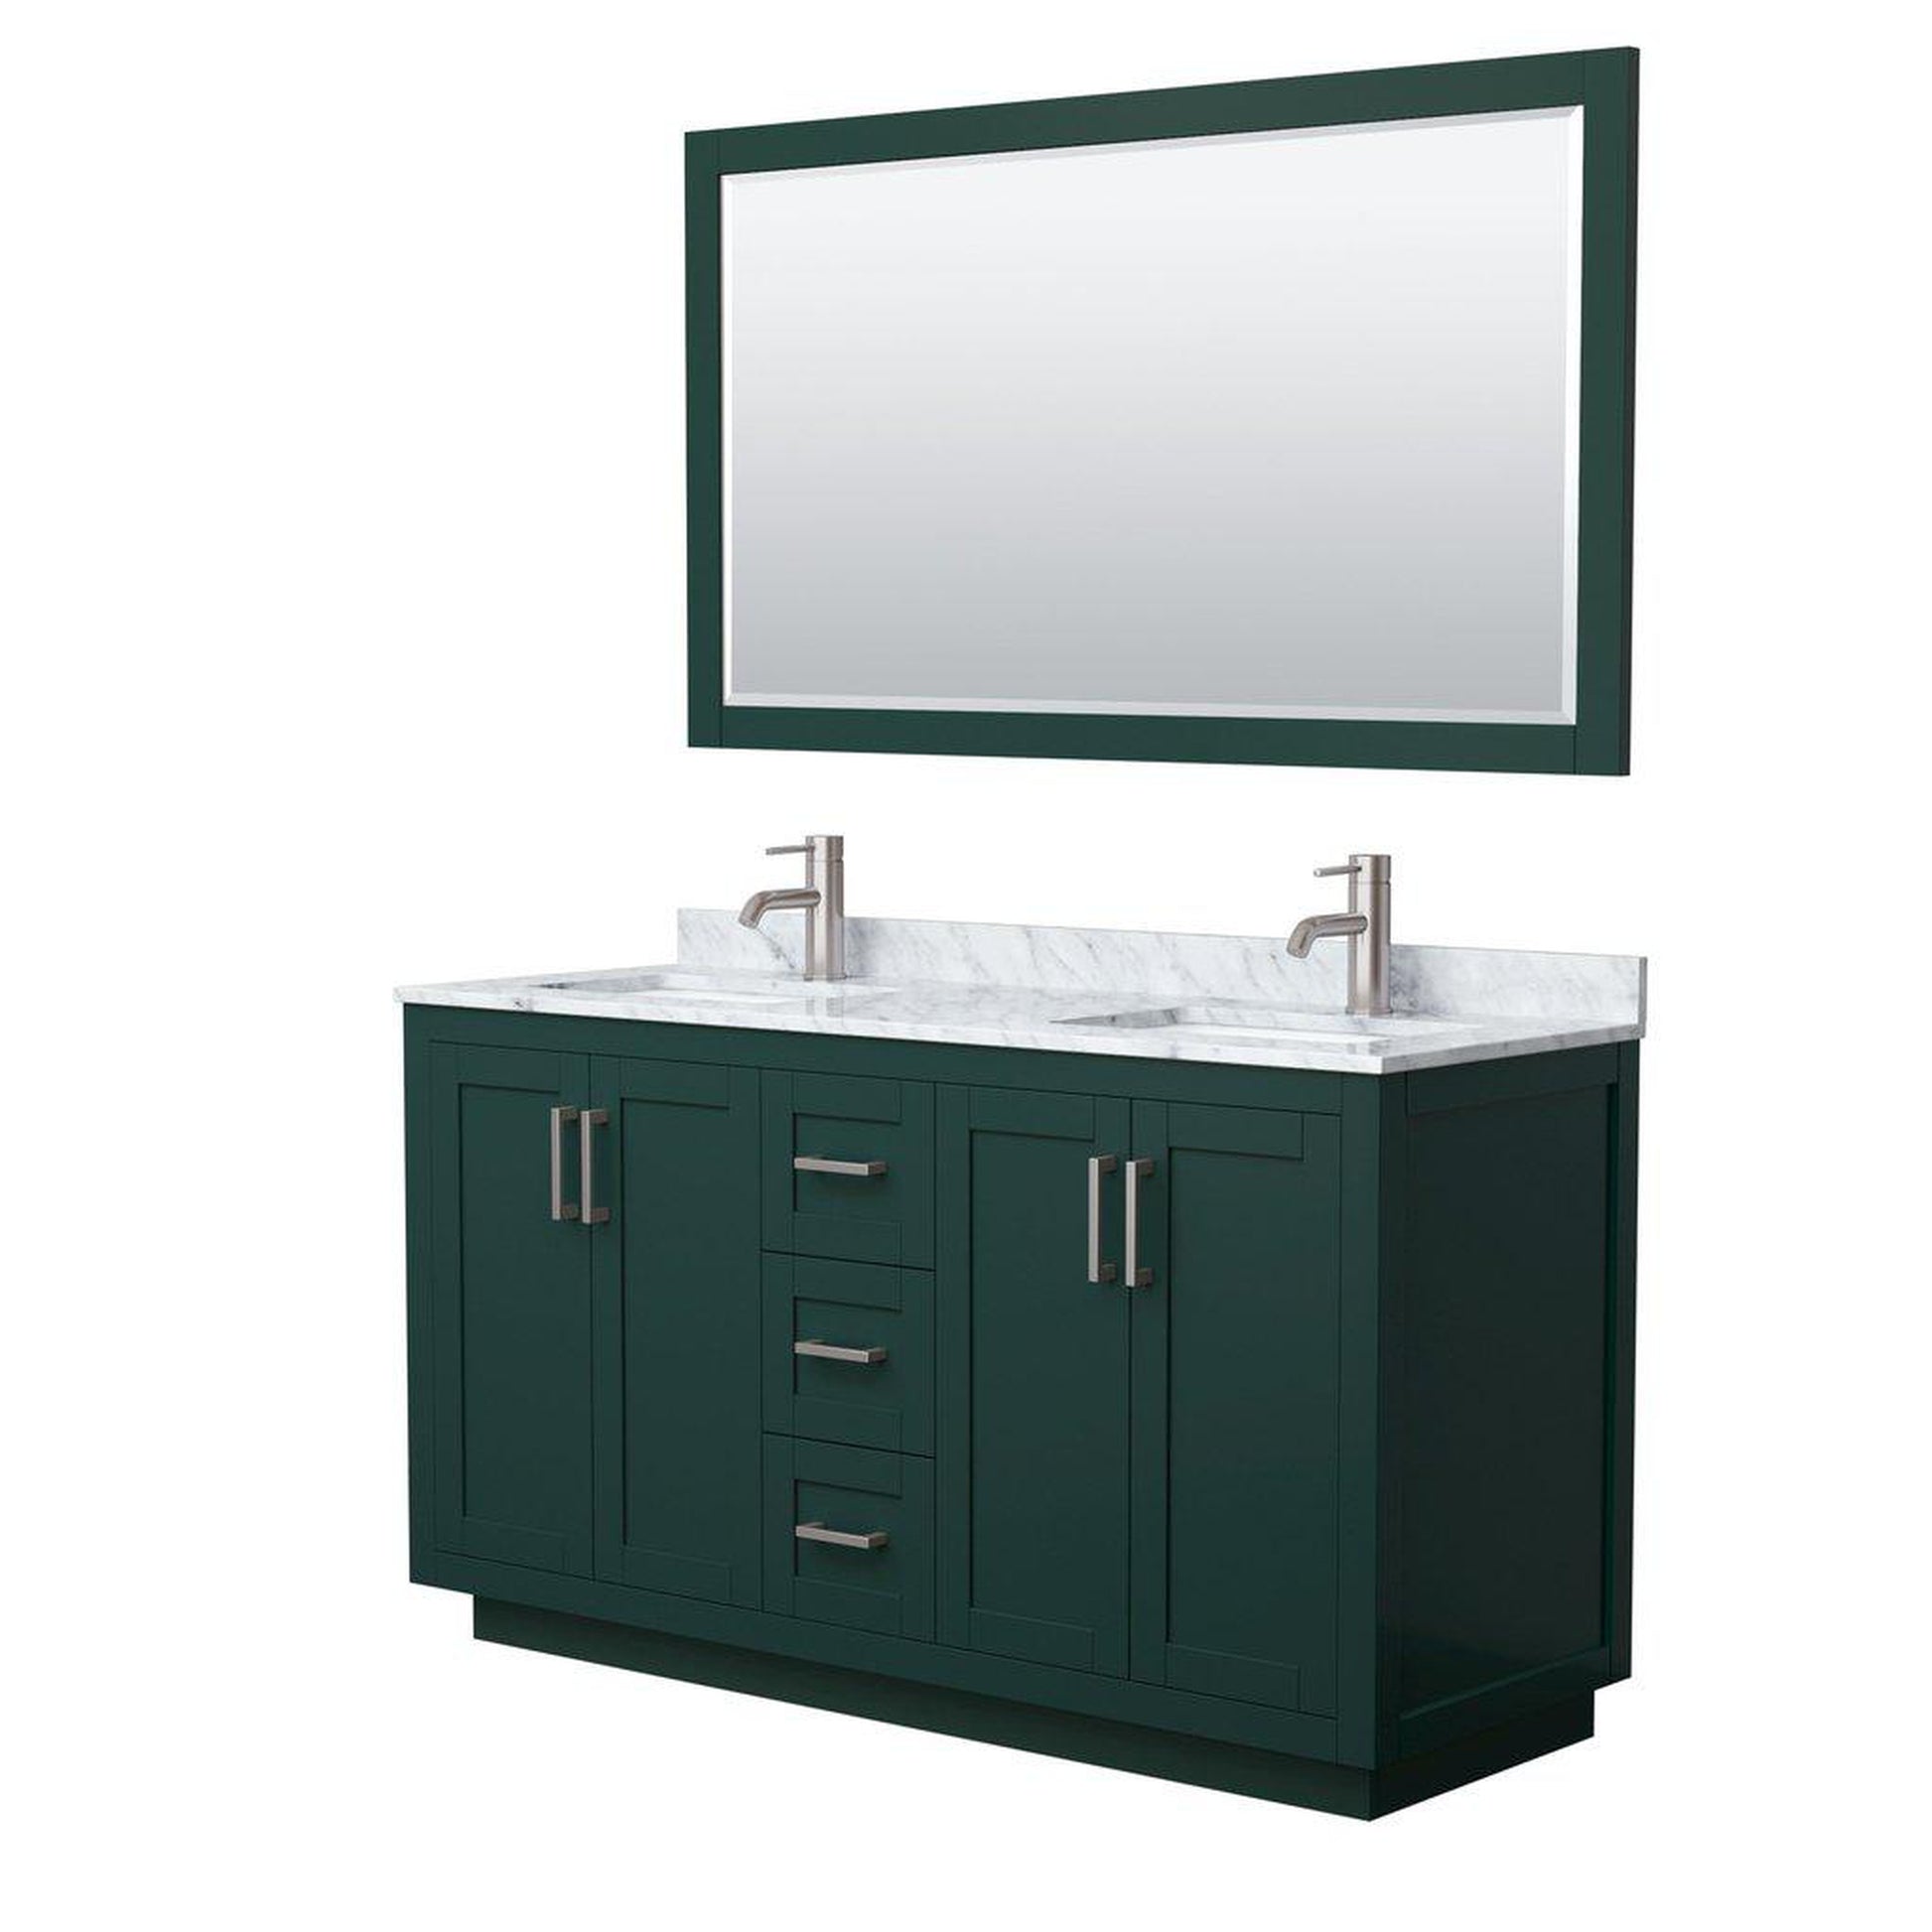 Wyndham Collection Miranda 60" Double Bathroom Green Vanity Set With White Carrara Marble Countertop, Undermount Square Sink, 58" Mirror And Brushed Nickel Trim